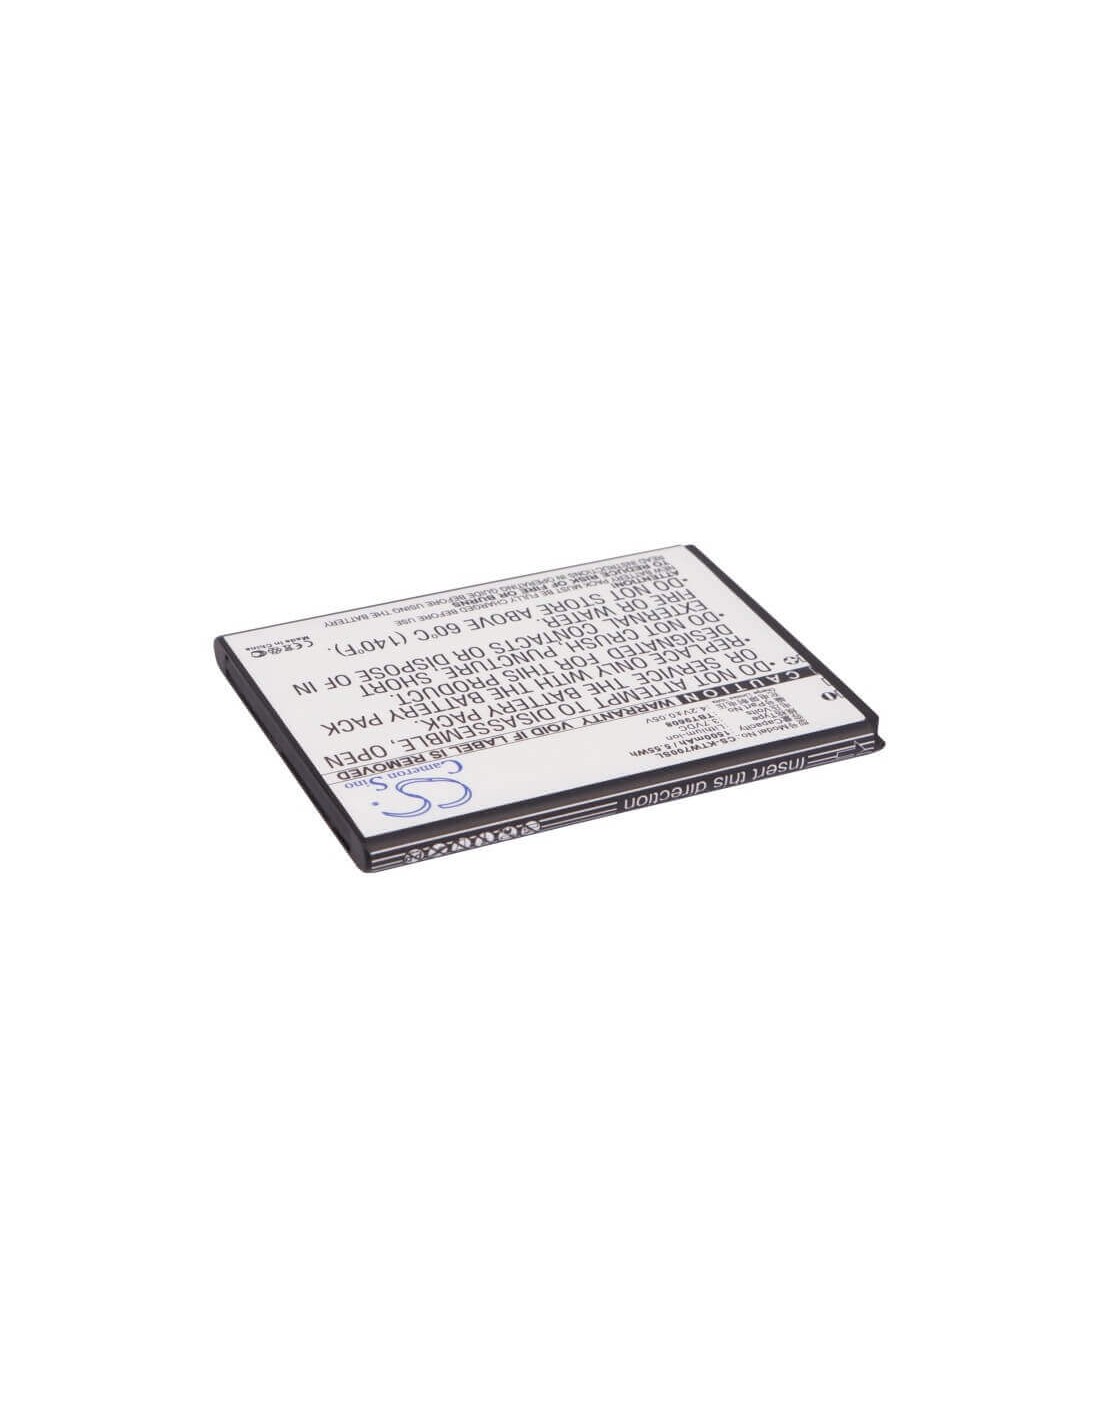 Battery for K-Touch W70, W70+, T87 3.7V, 1500mAh - 5.55Wh